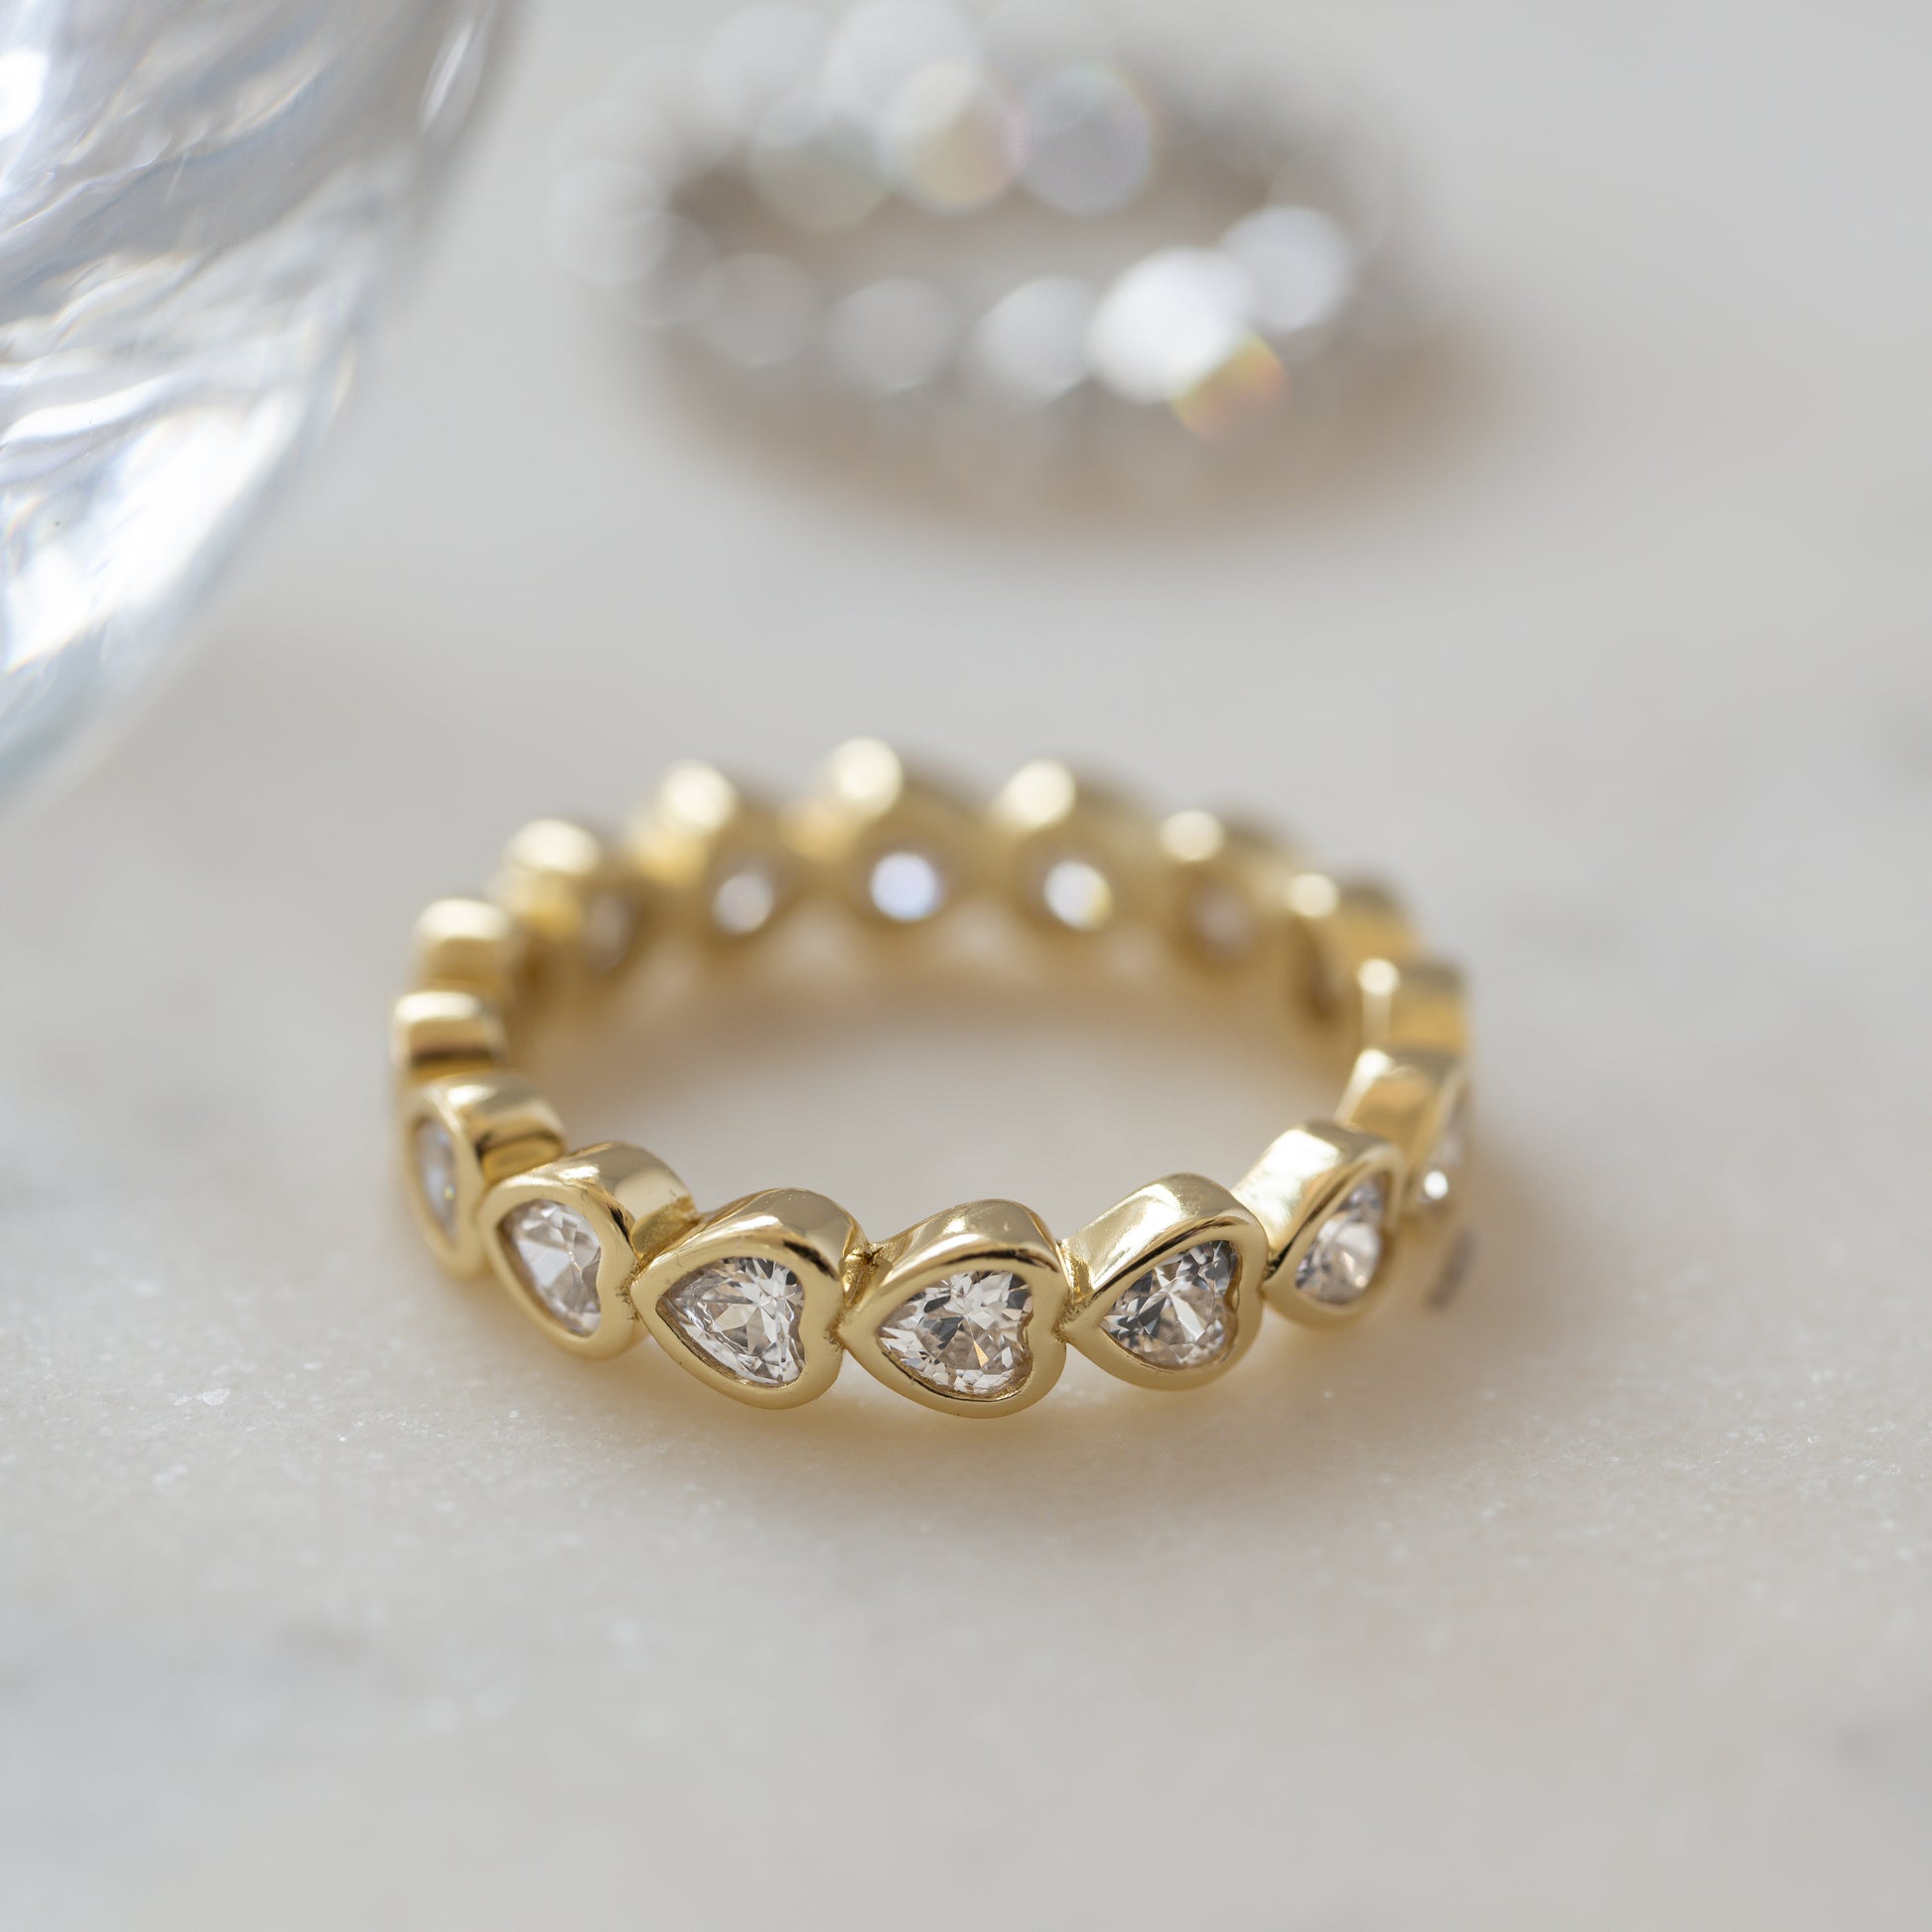 gold promise ring with heart shaped diamond stones